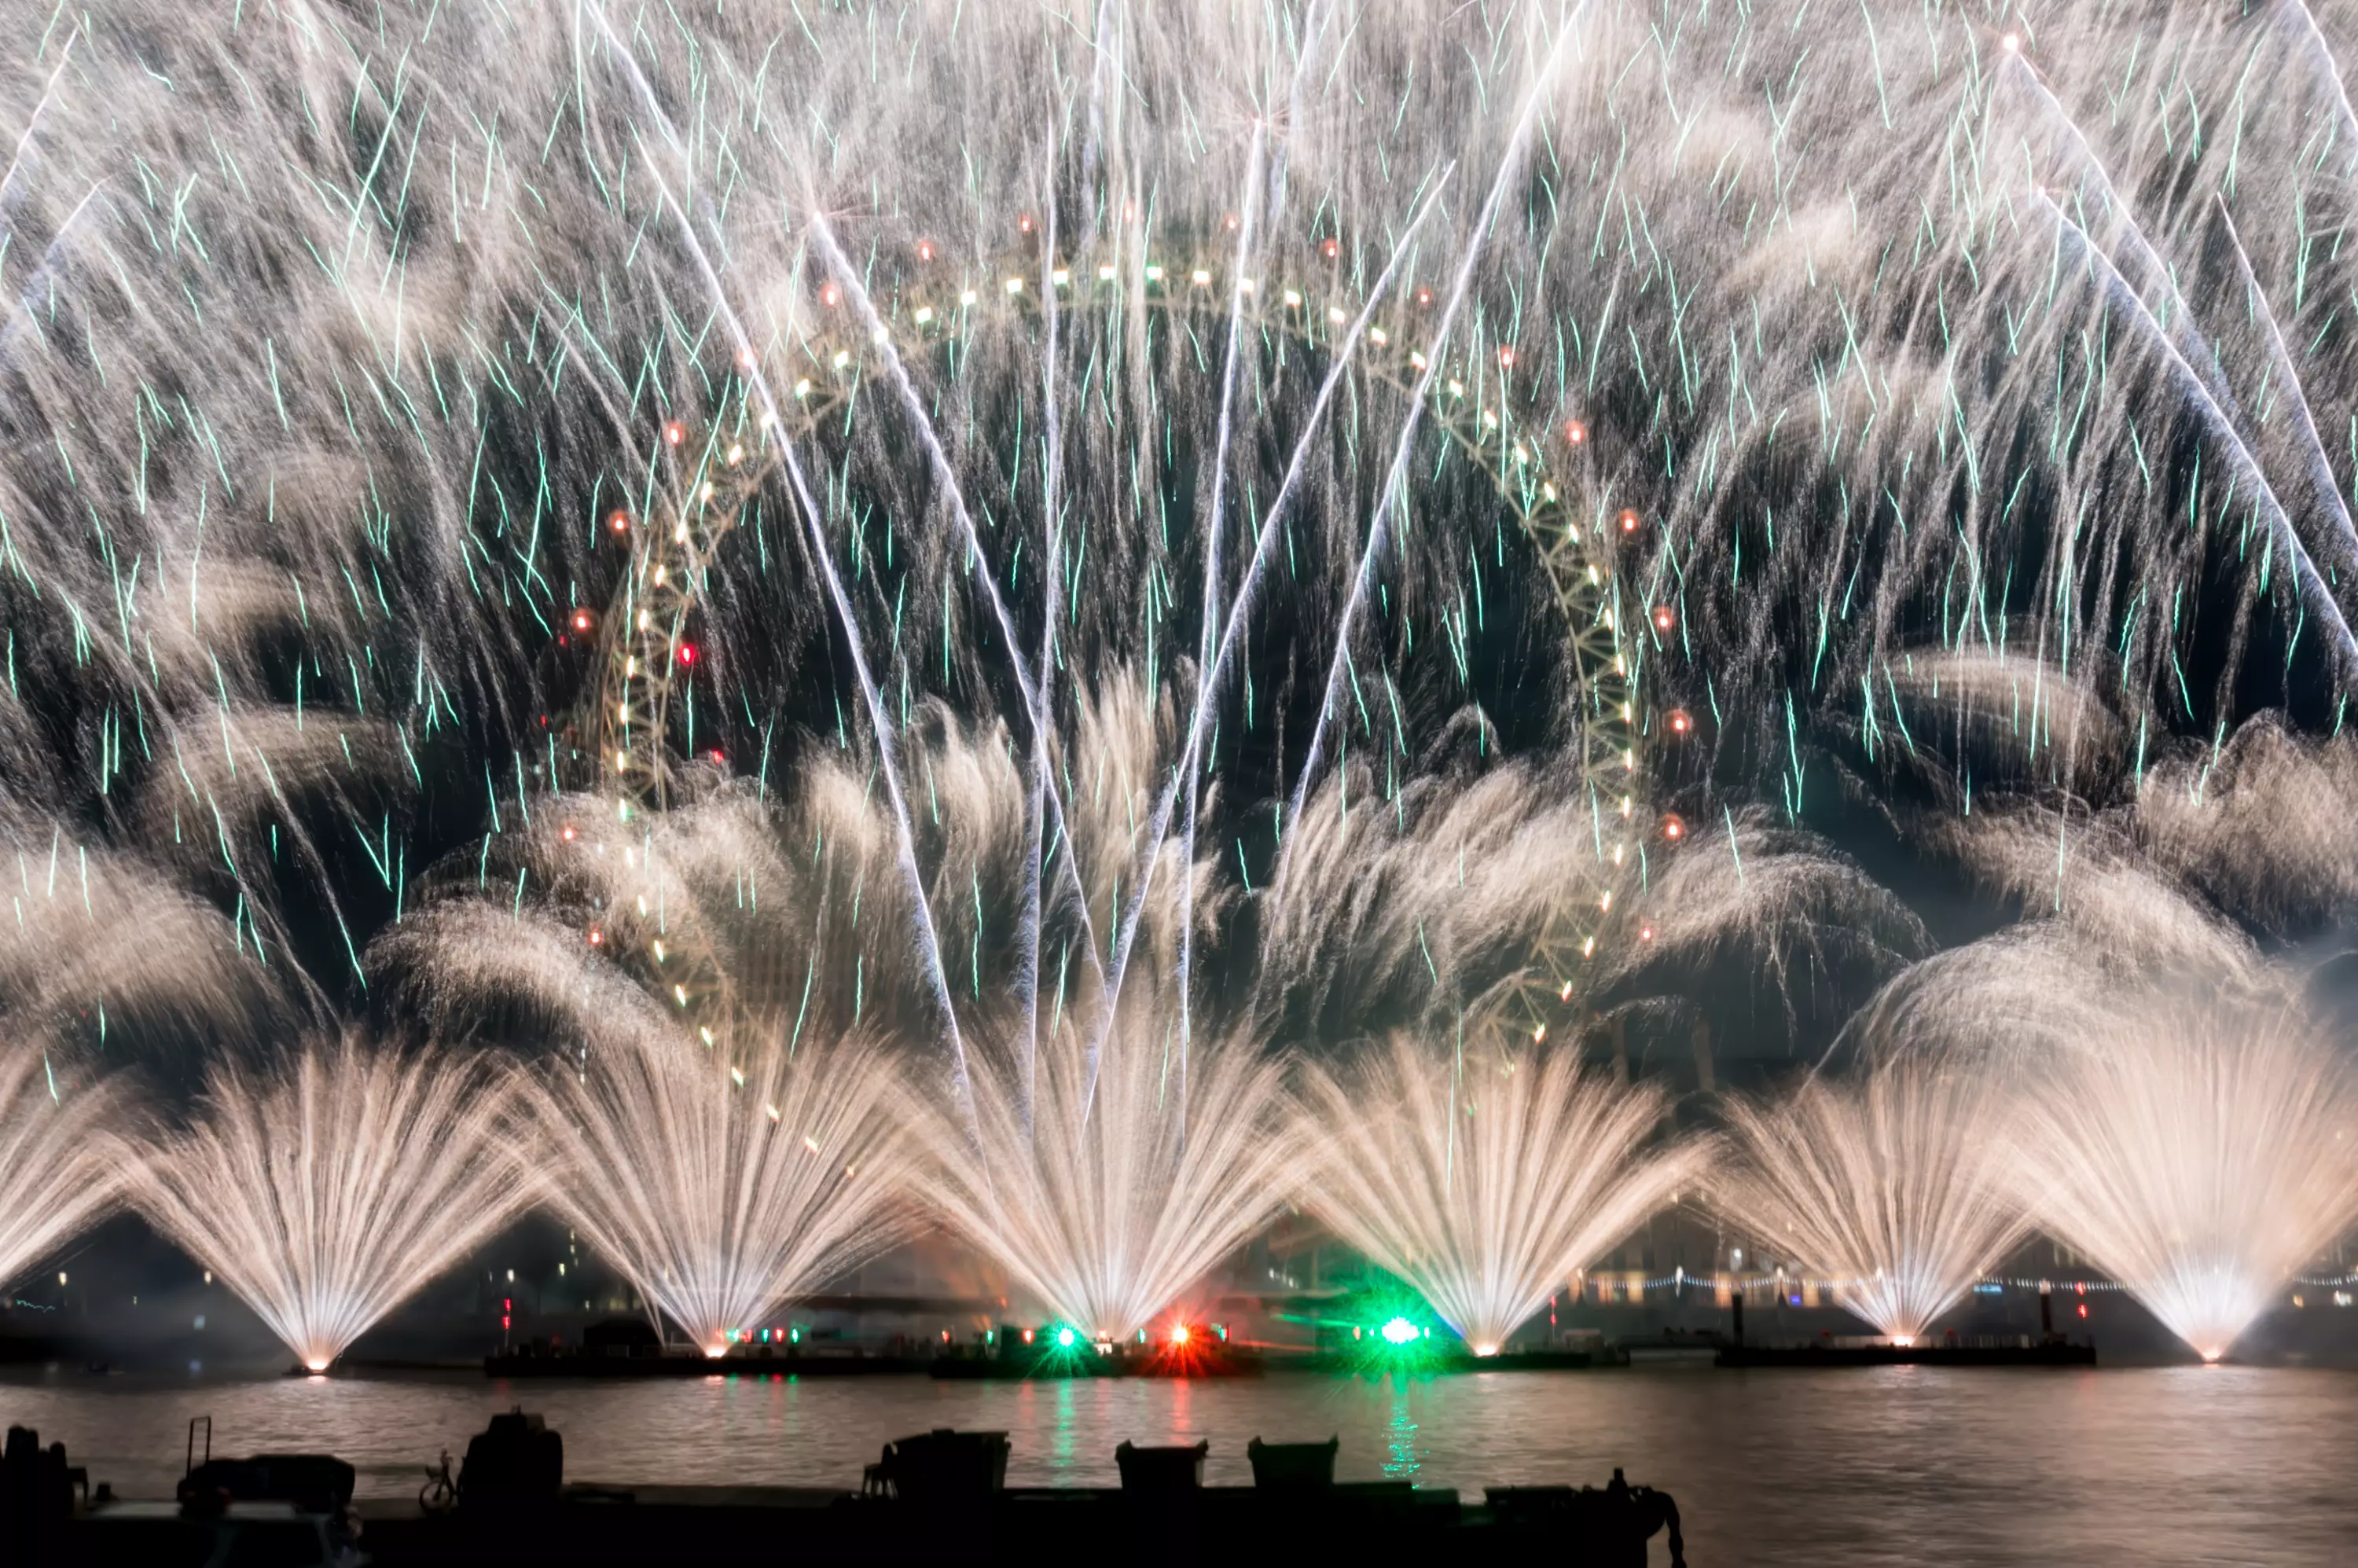 Firework displays in the UK were cancelled this year.